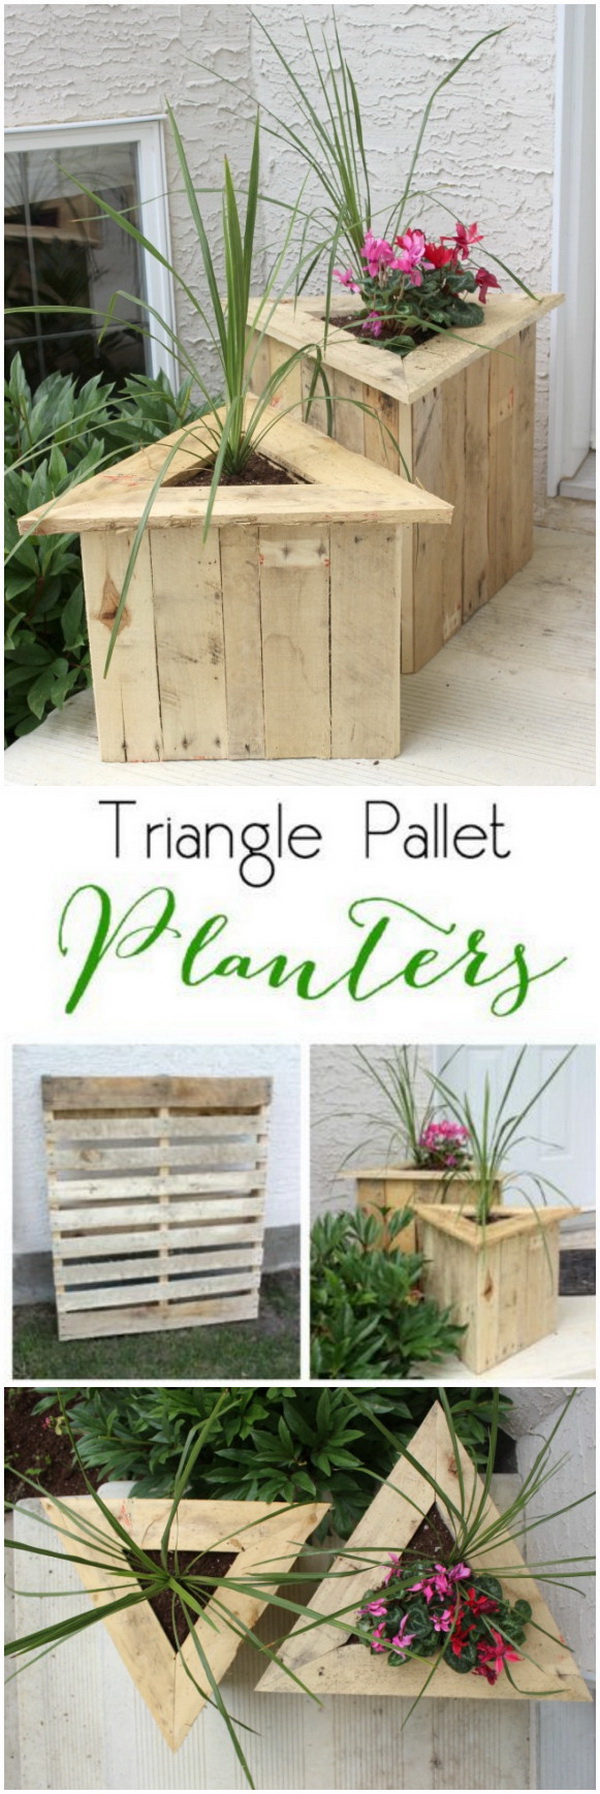 Triangle Pallet Planters. These triangle pallet planters are great for the porch or deck. Quick and easy to make with a bit of woodworking skills. 